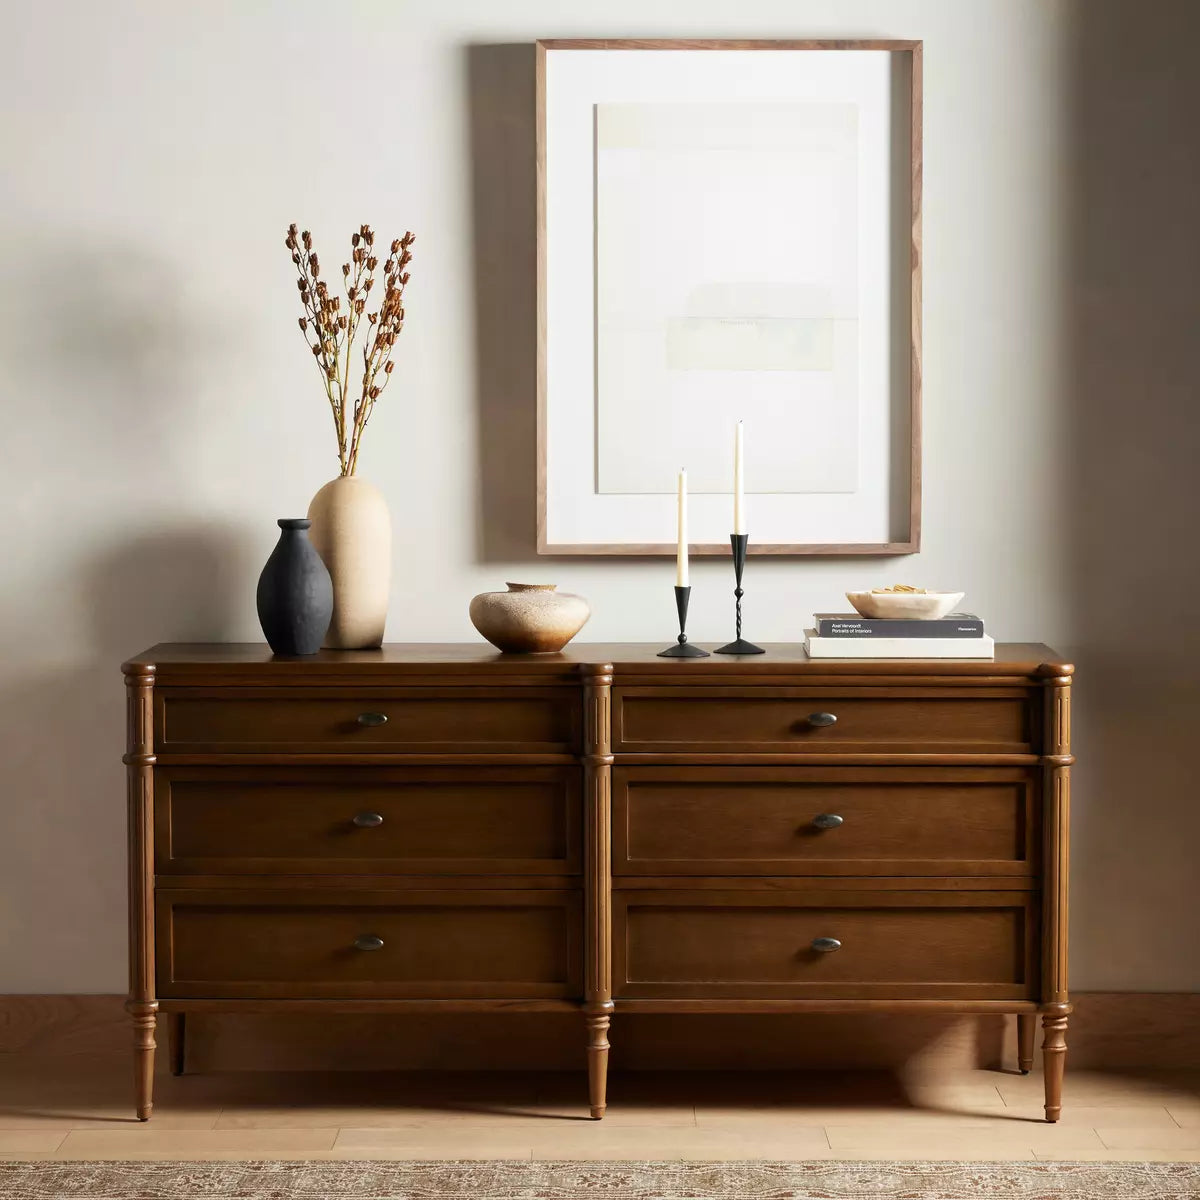 Toulouse Toasted Oak 6 Drawer Dresser